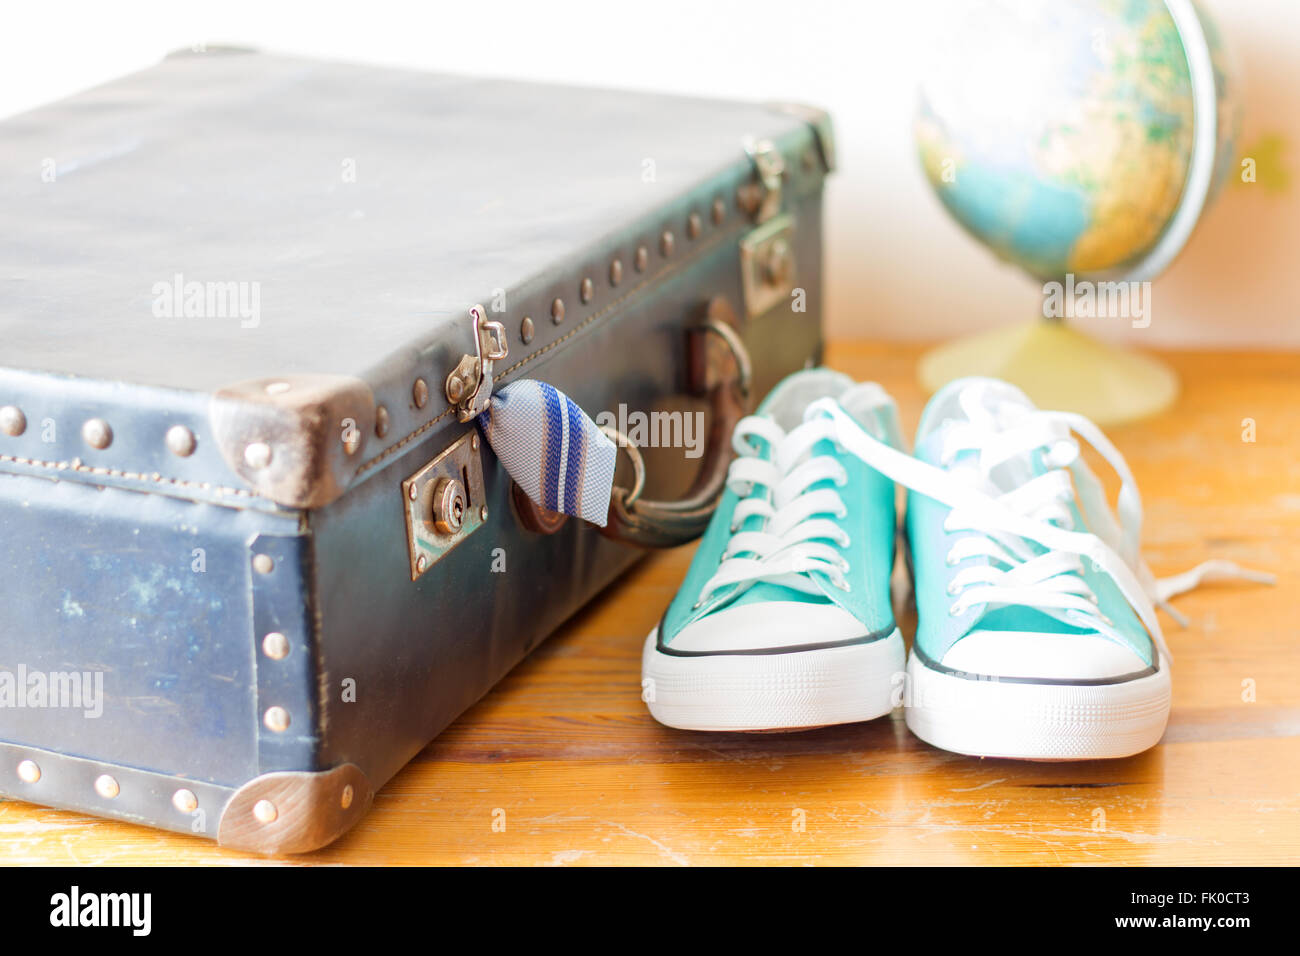 Travel concept with holiday suitcase, shoes and globe concept Stock Photo